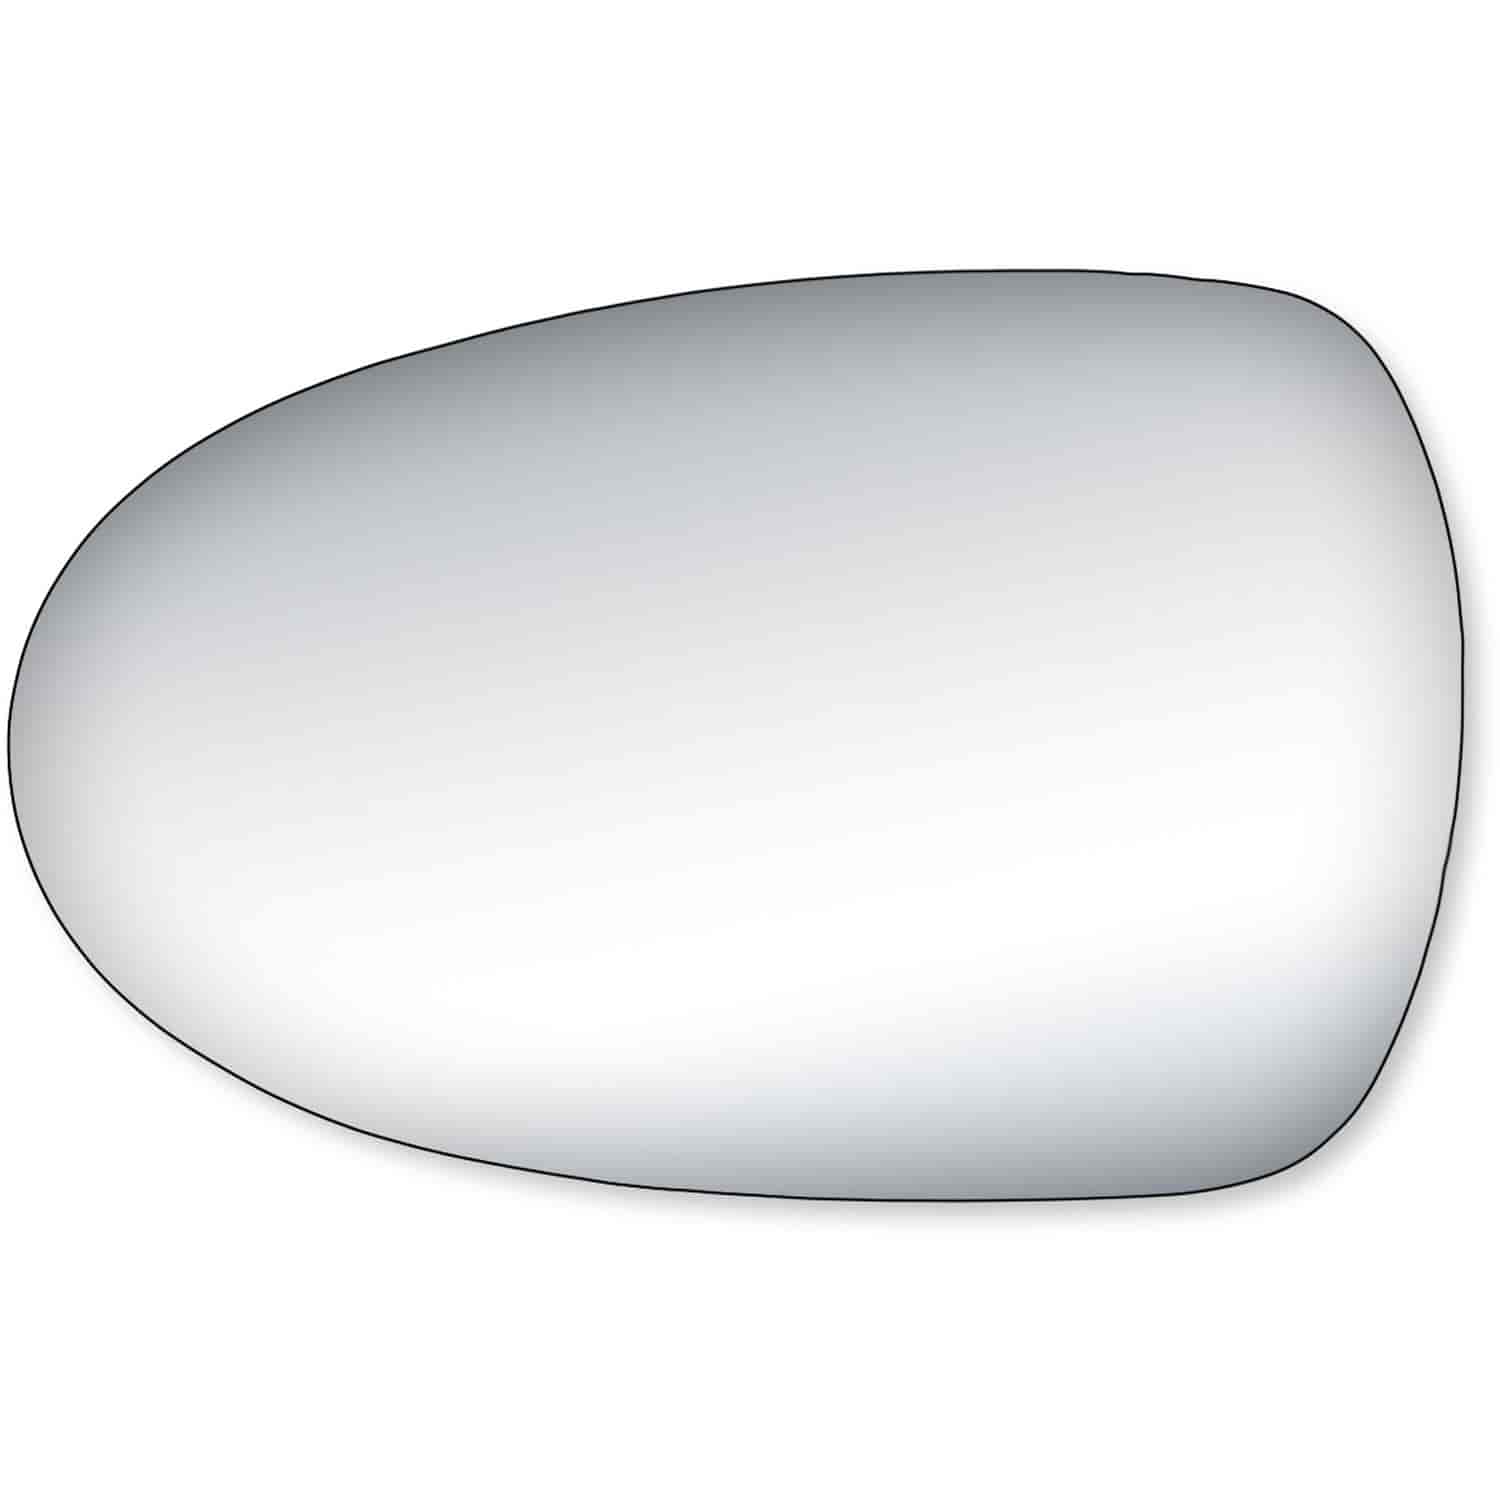 Replacement Glass for 95-99 Sentra Sedan; 95-99 200SX